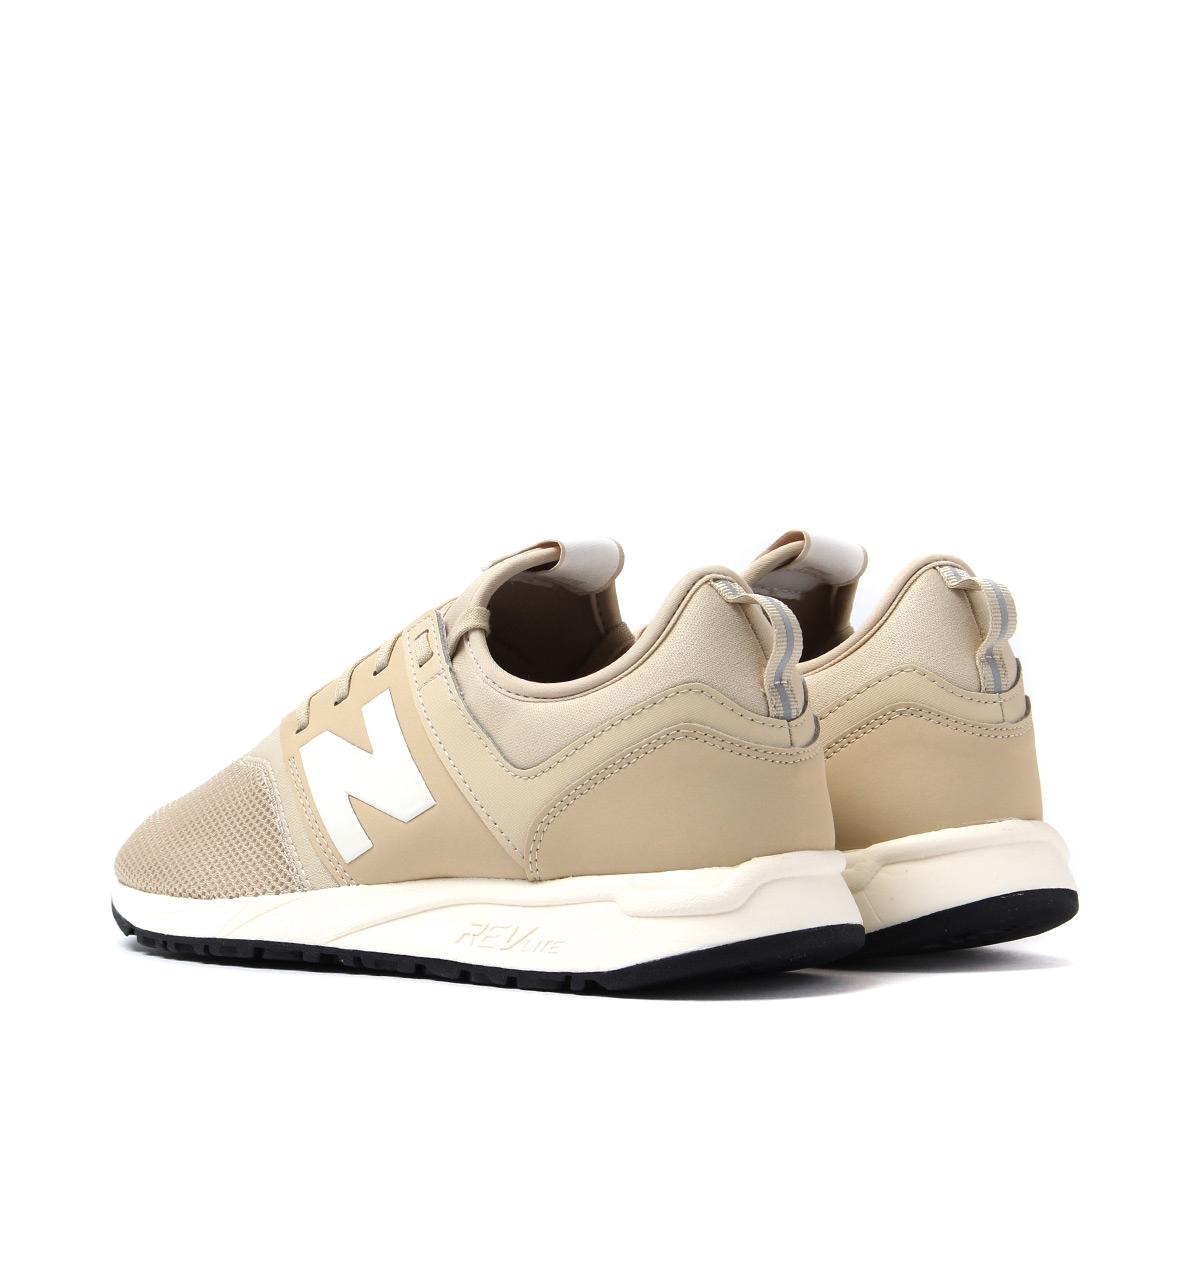 New Balance 247 Beige Trainers in Natural for Men - Lyst